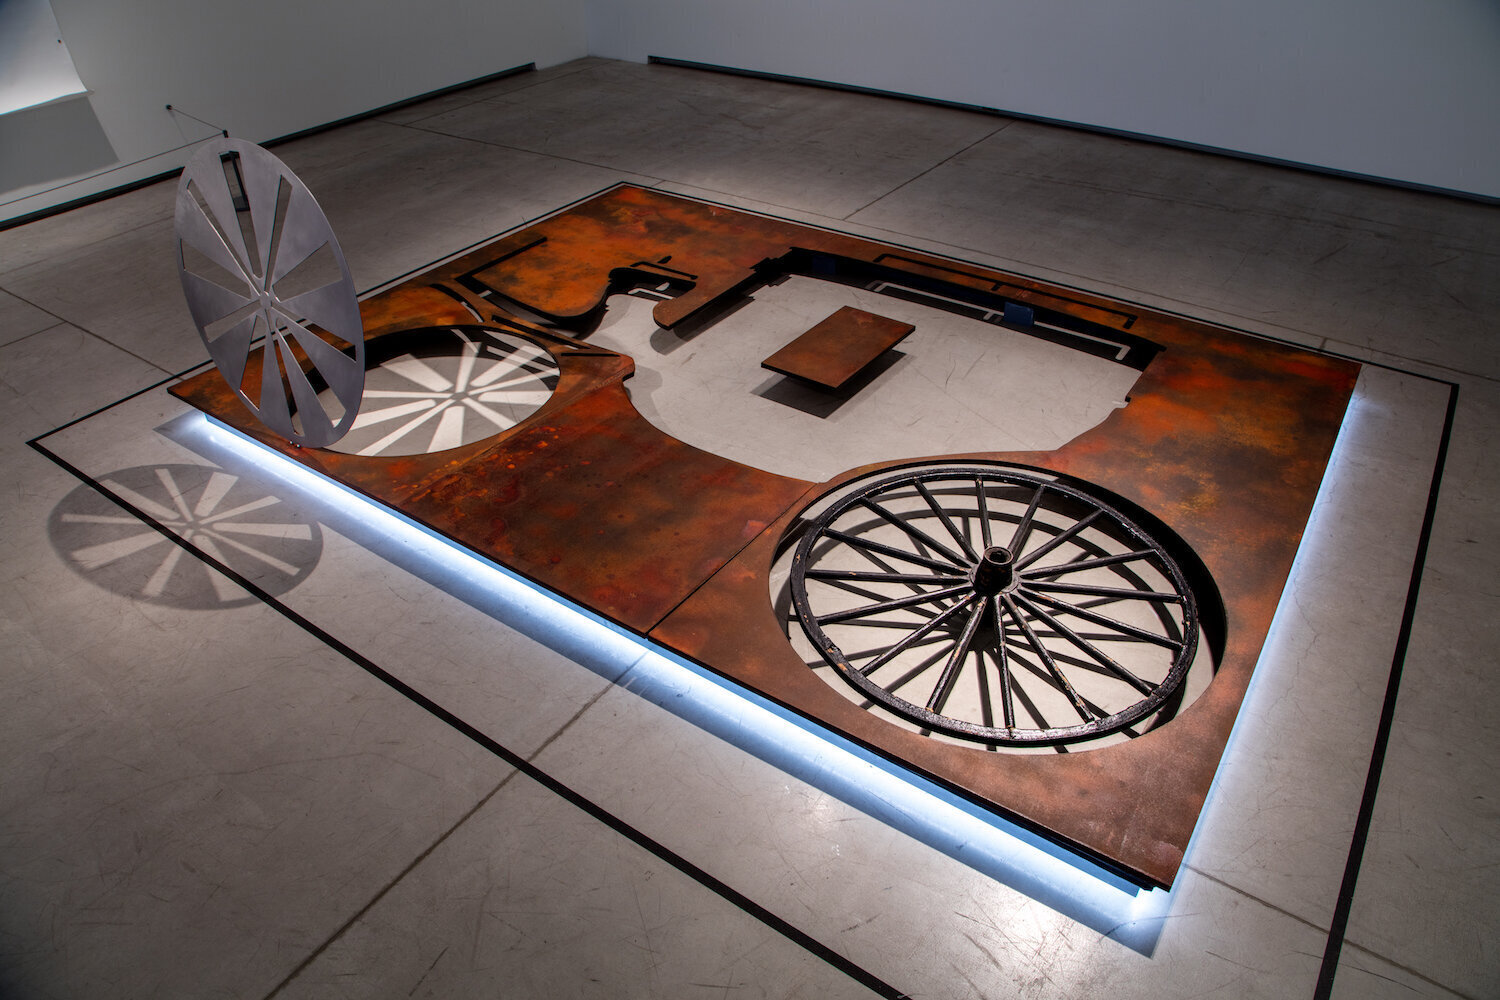    A Mobile and Visible Carriage,   Charmaine Lurch, 2017 (installation view), MDF painted with metal based paint, stainless steel, antique wheel, wood, LED Light, 10’x11’ 